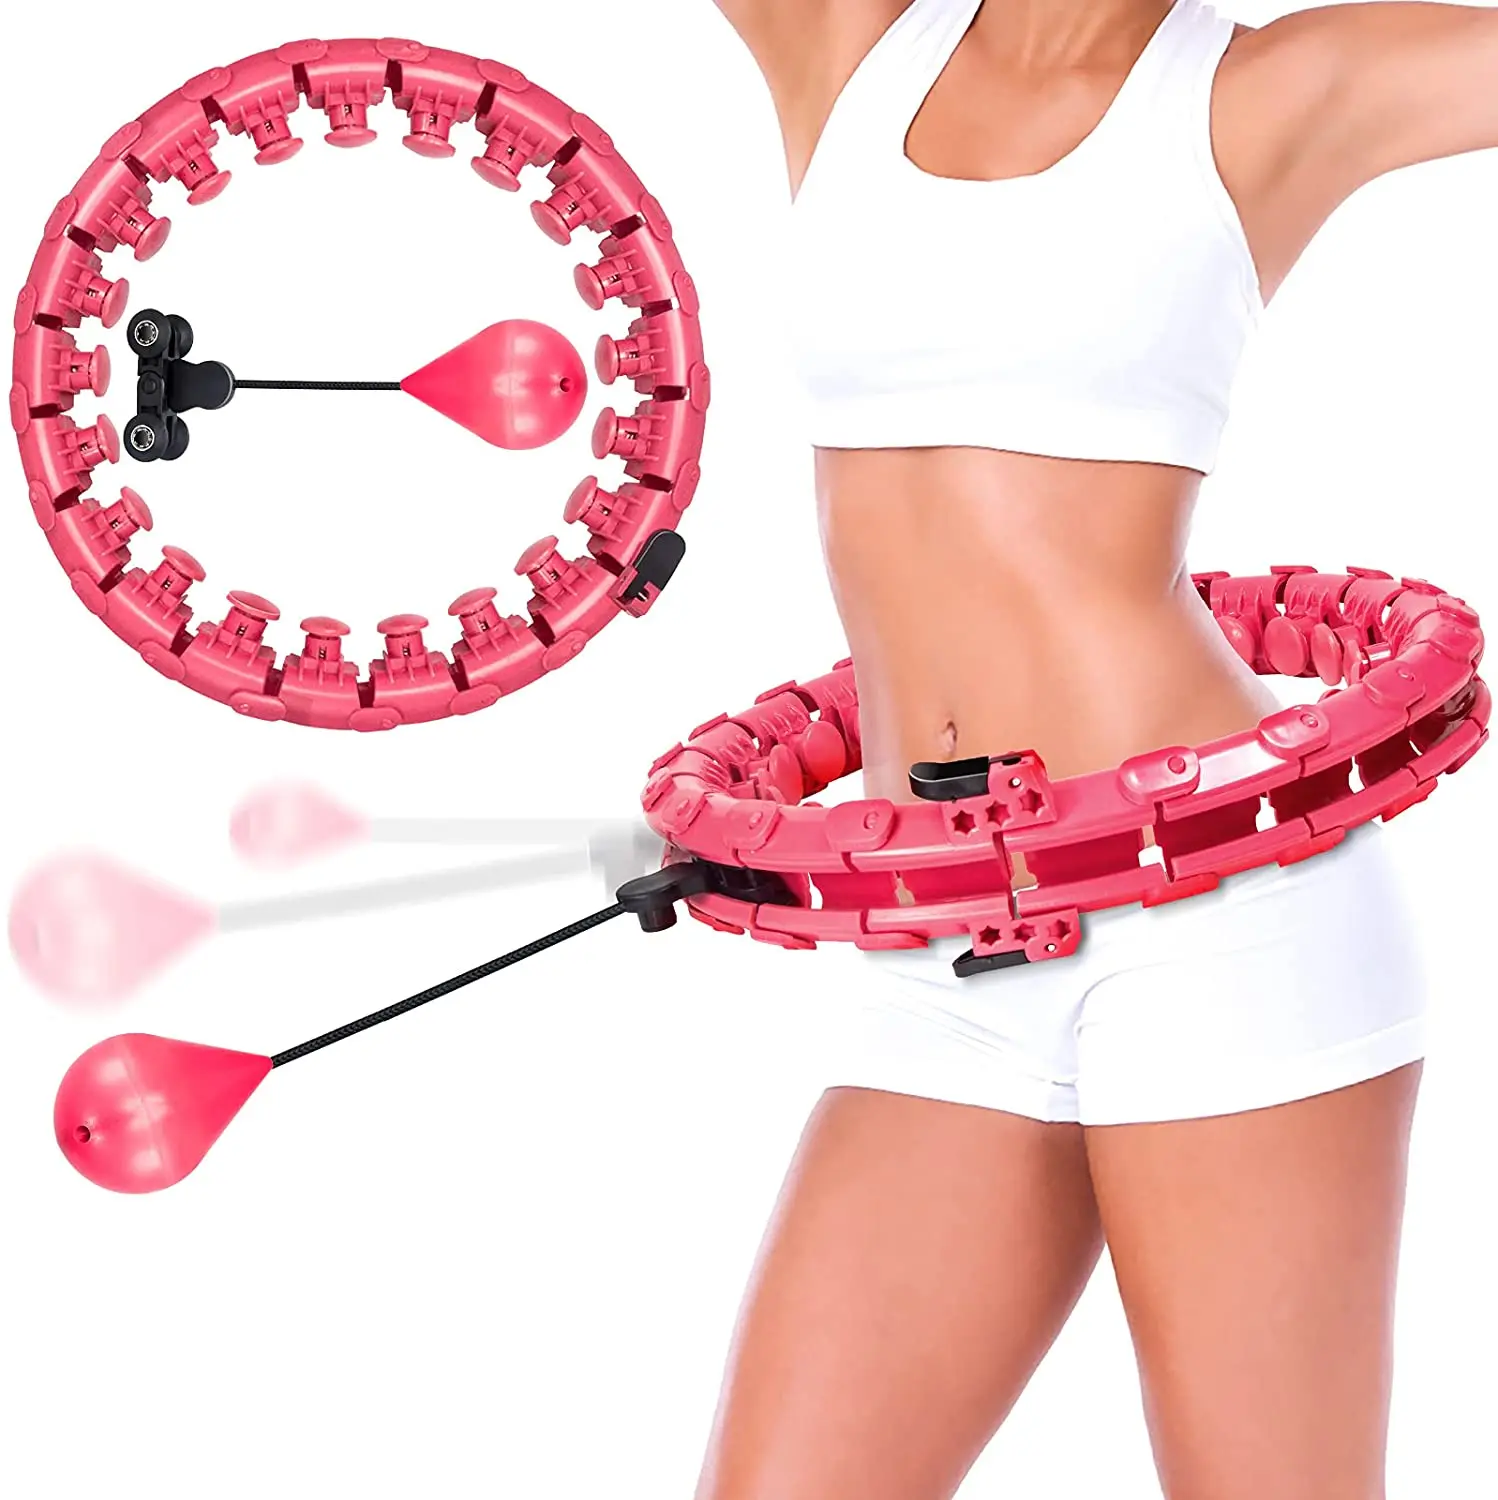 Detachable Weight Loss and Massage Color : Pink PHLPS Abdomen Fitness Equipment Weighted Smart Hula Hoop 24 Knots Weighted 360° Fitness 2 in 1 Fitness Weight Loss and Massage 